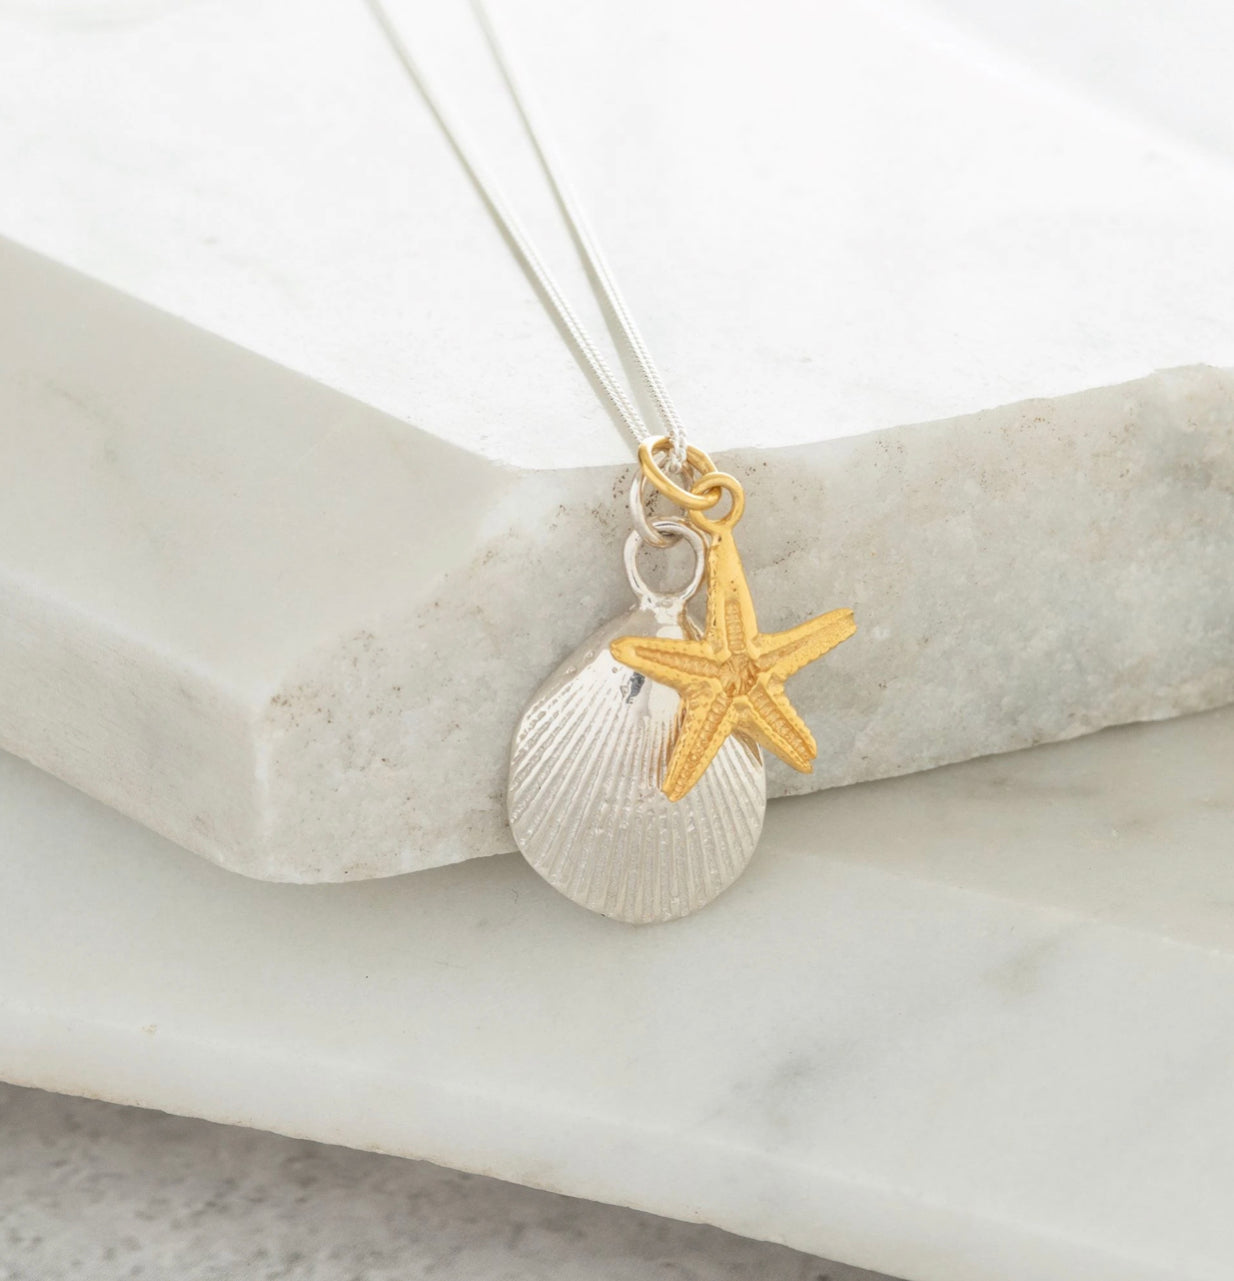 Shell and starfish necklace in silver and gold vermeil